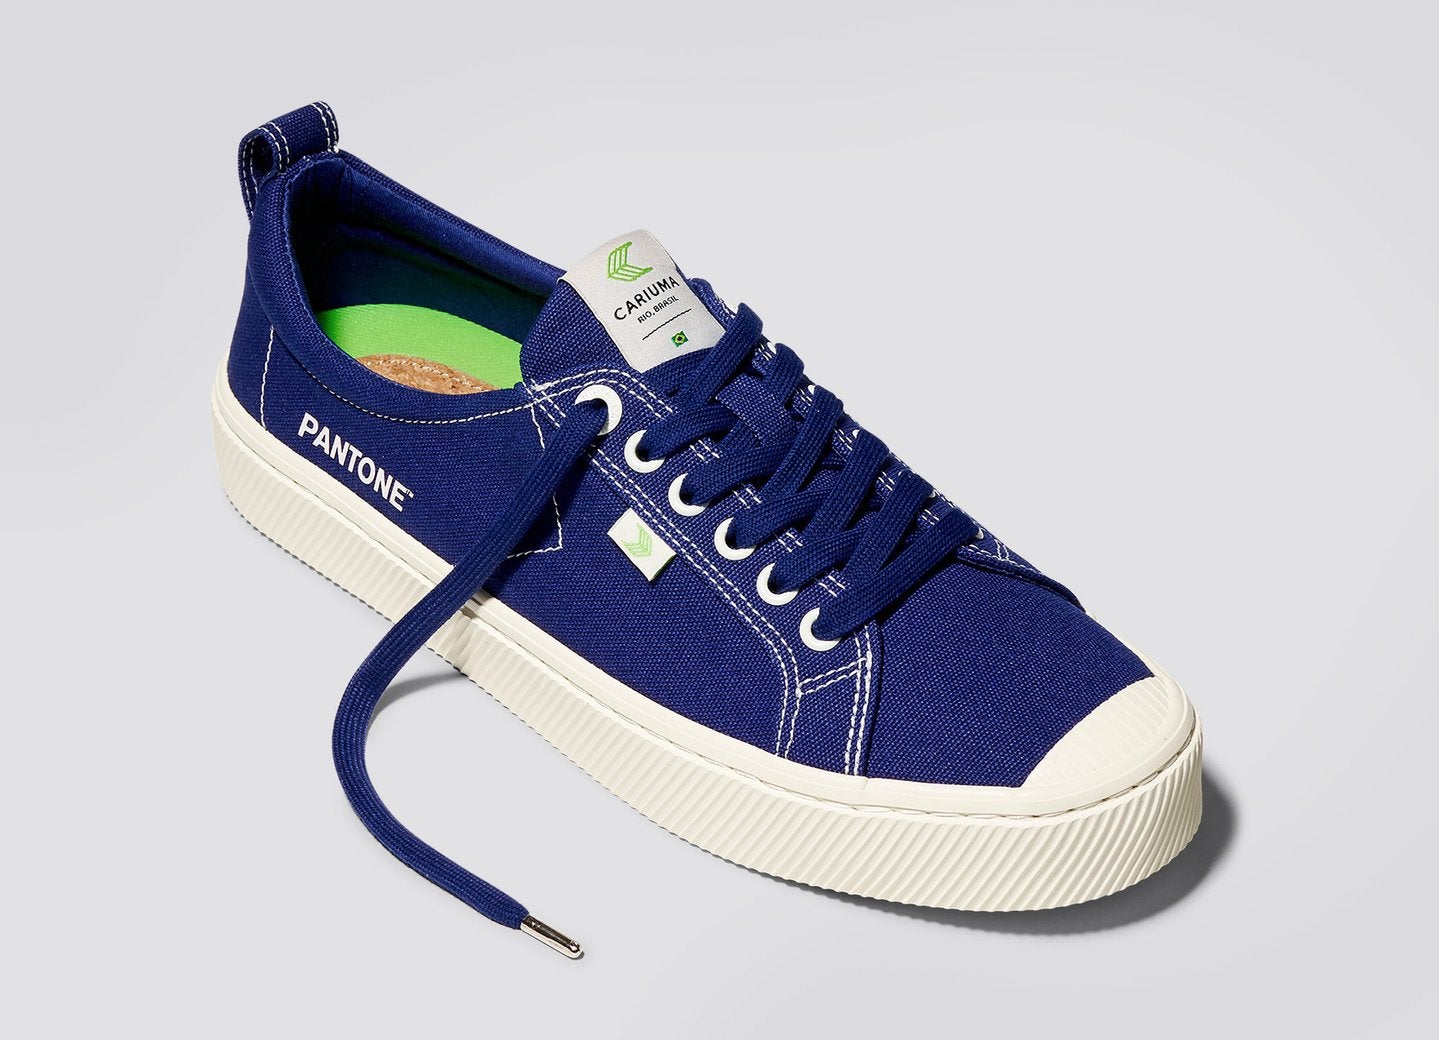 Cariuma And Pantone Sustainable Sneaker Back In Stock